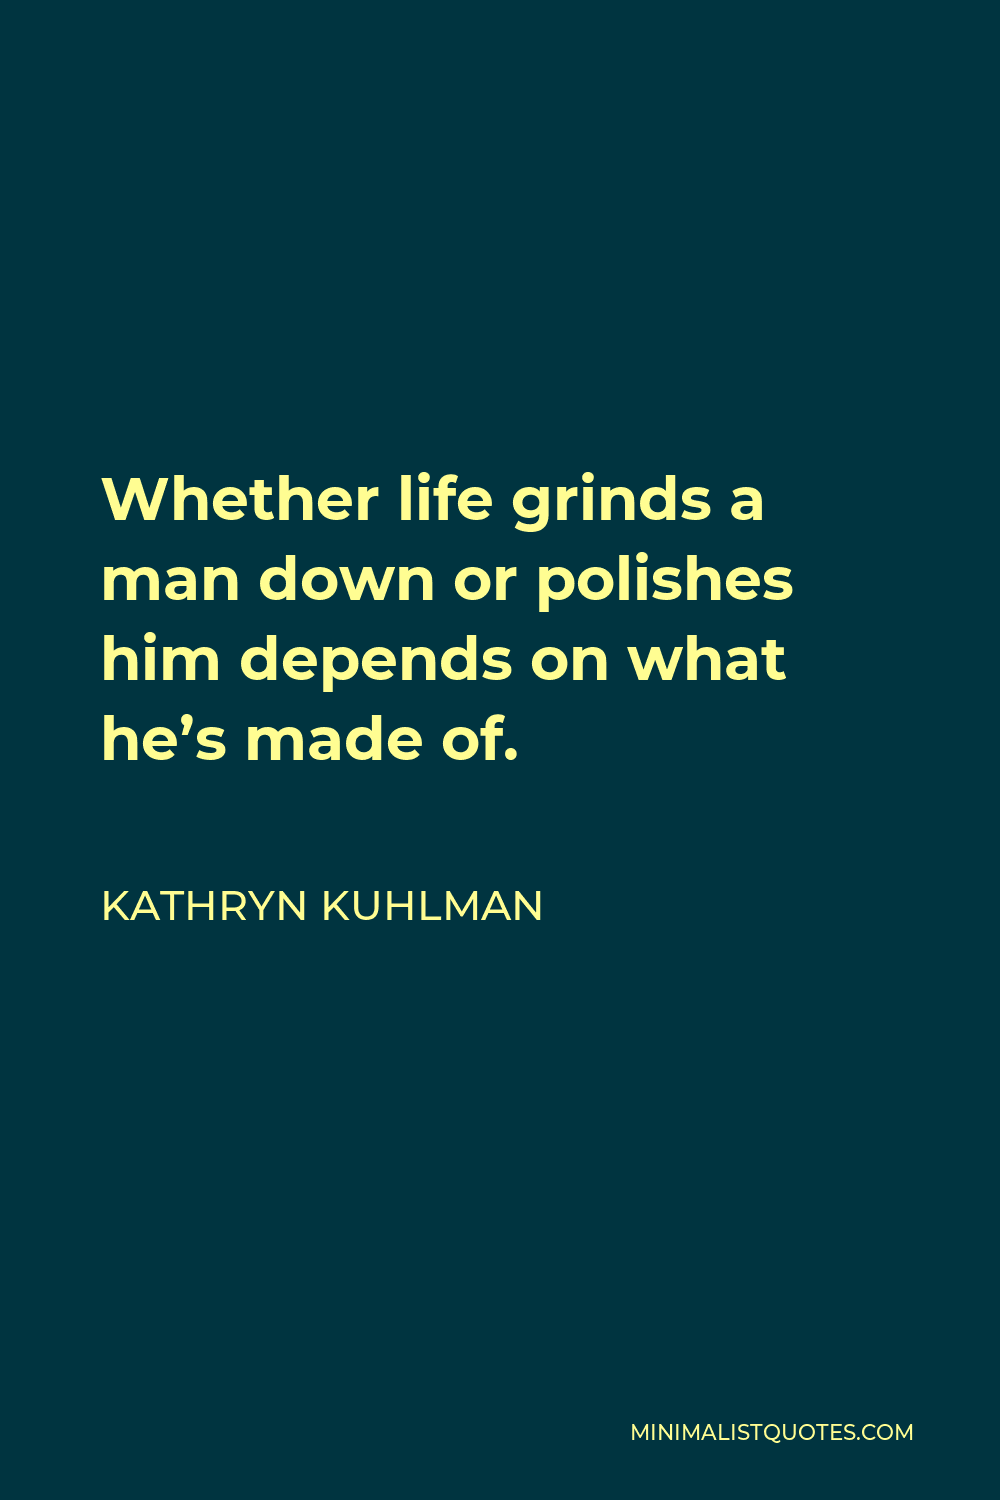 Kathryn Kuhlman Quote - Whether life grinds a man down or polishes him depends on what he’s made of.